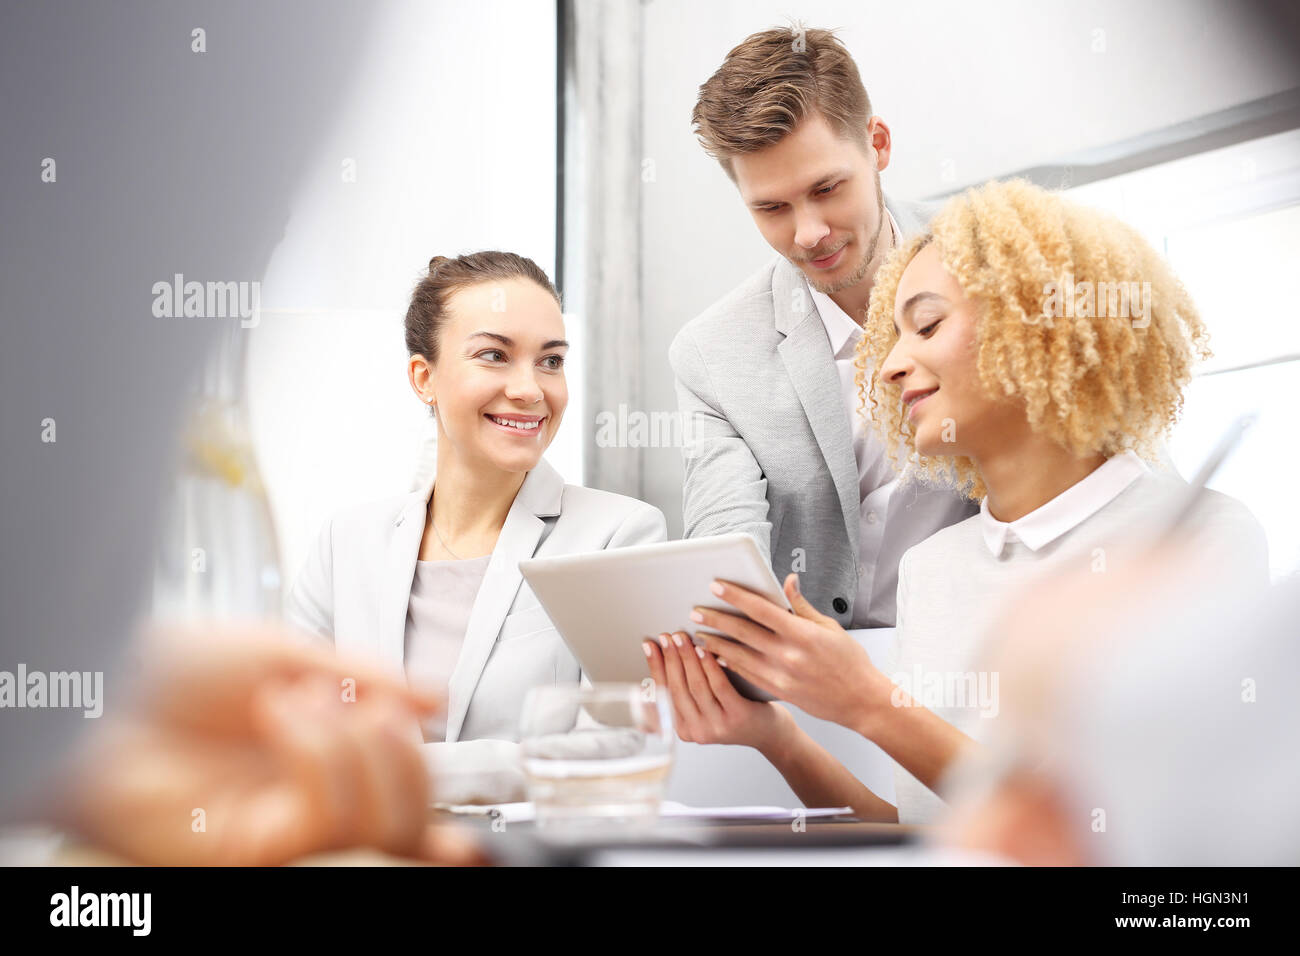 Training company, a group of employees. Corporate business meeting. Office work. Business consultants while working in a team. Stock Photo